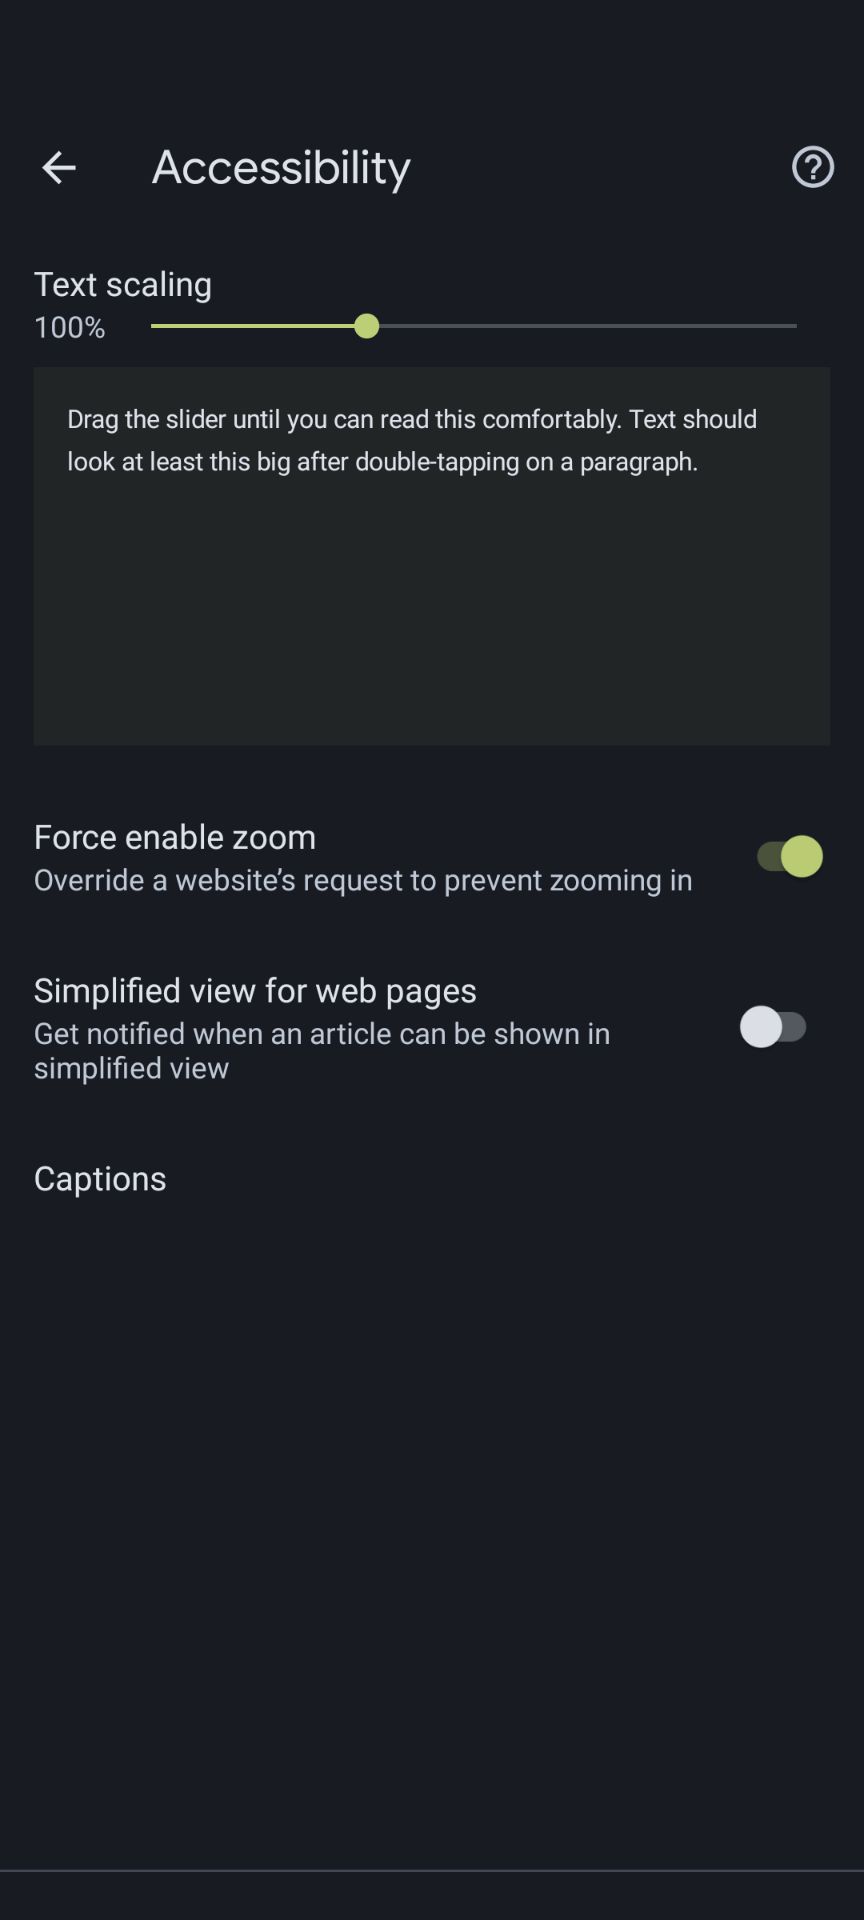 The Accessibility options in the Chrome mobile app